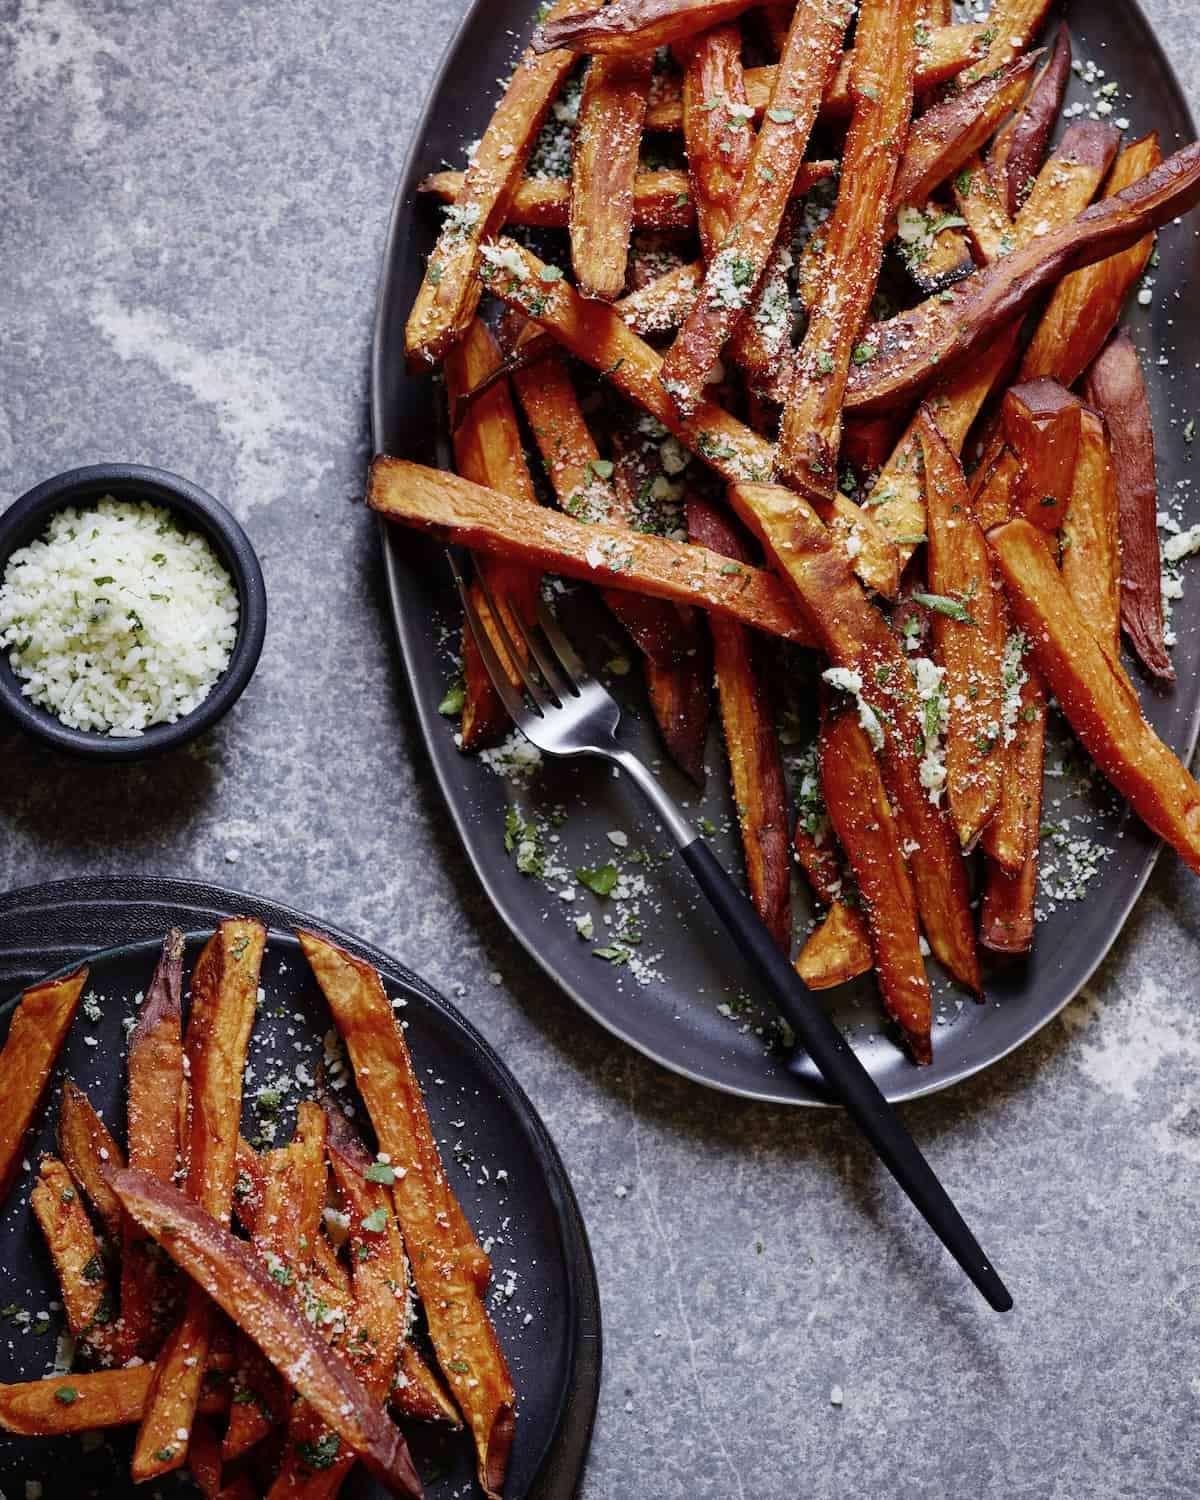 Two oval slate platters with sweet potato fries, garnished with minced garlic, parsley and parmesan cheese.